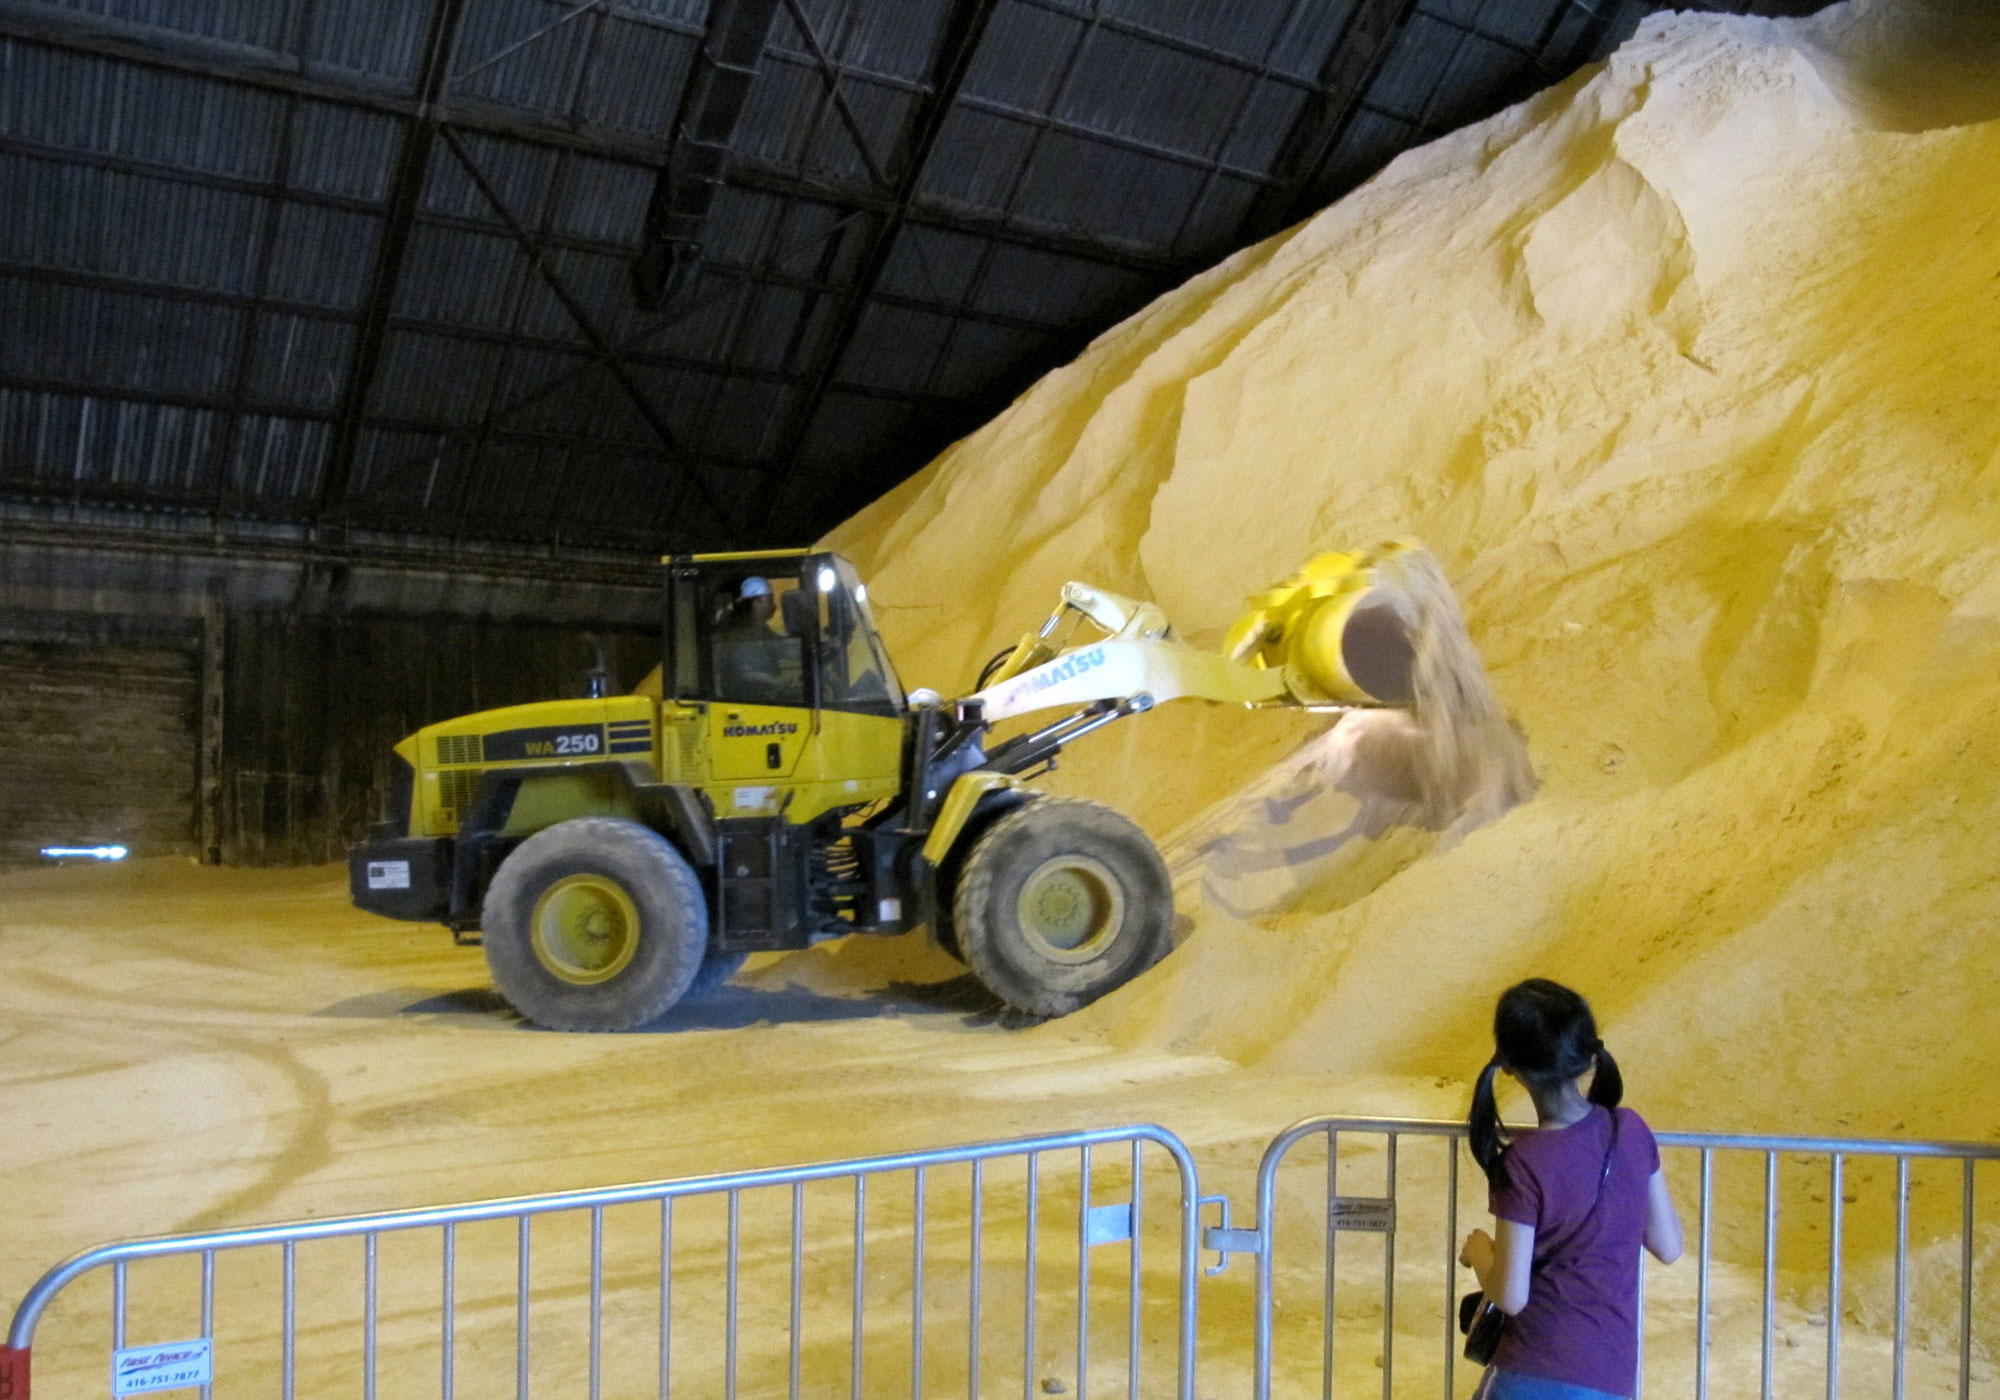 Photograph of a pile of raw sugar. A yellow front end loader scoops up some of the sugar in the pile. A girl in the foreground is watching the front-end loader operate from behind a metal barrier. 